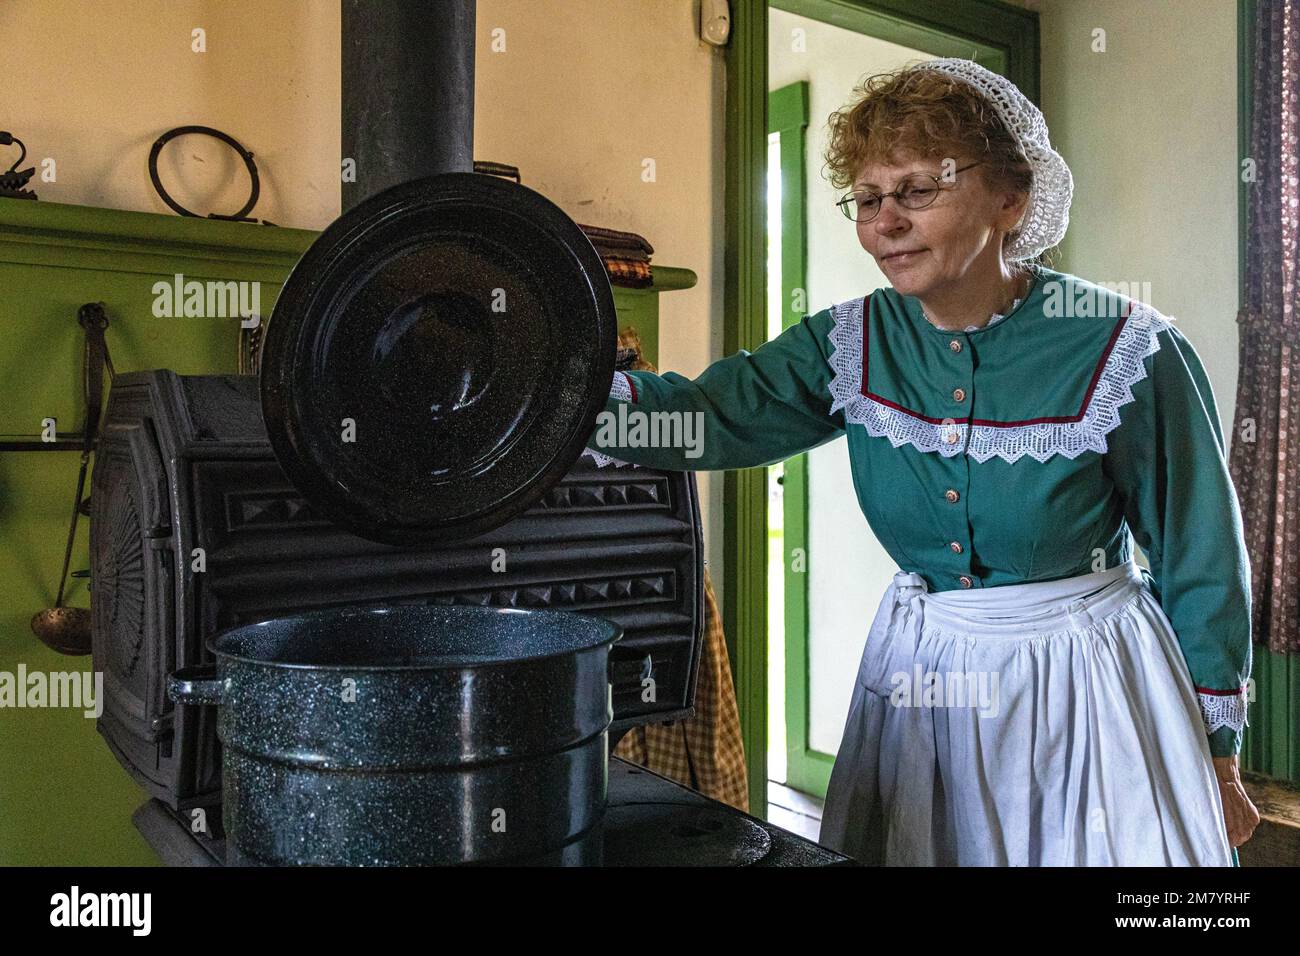 WOMAN AT THE STOVE, PERLEY FARM, KINGS LANDING, HISTORIC ANGLOPHONE VILLAGE, PRINCE WILLIAM PARISH, FREDERICTON, NEW BRUNSWICK, CANADA, NORTH AMERICA Stock Photo